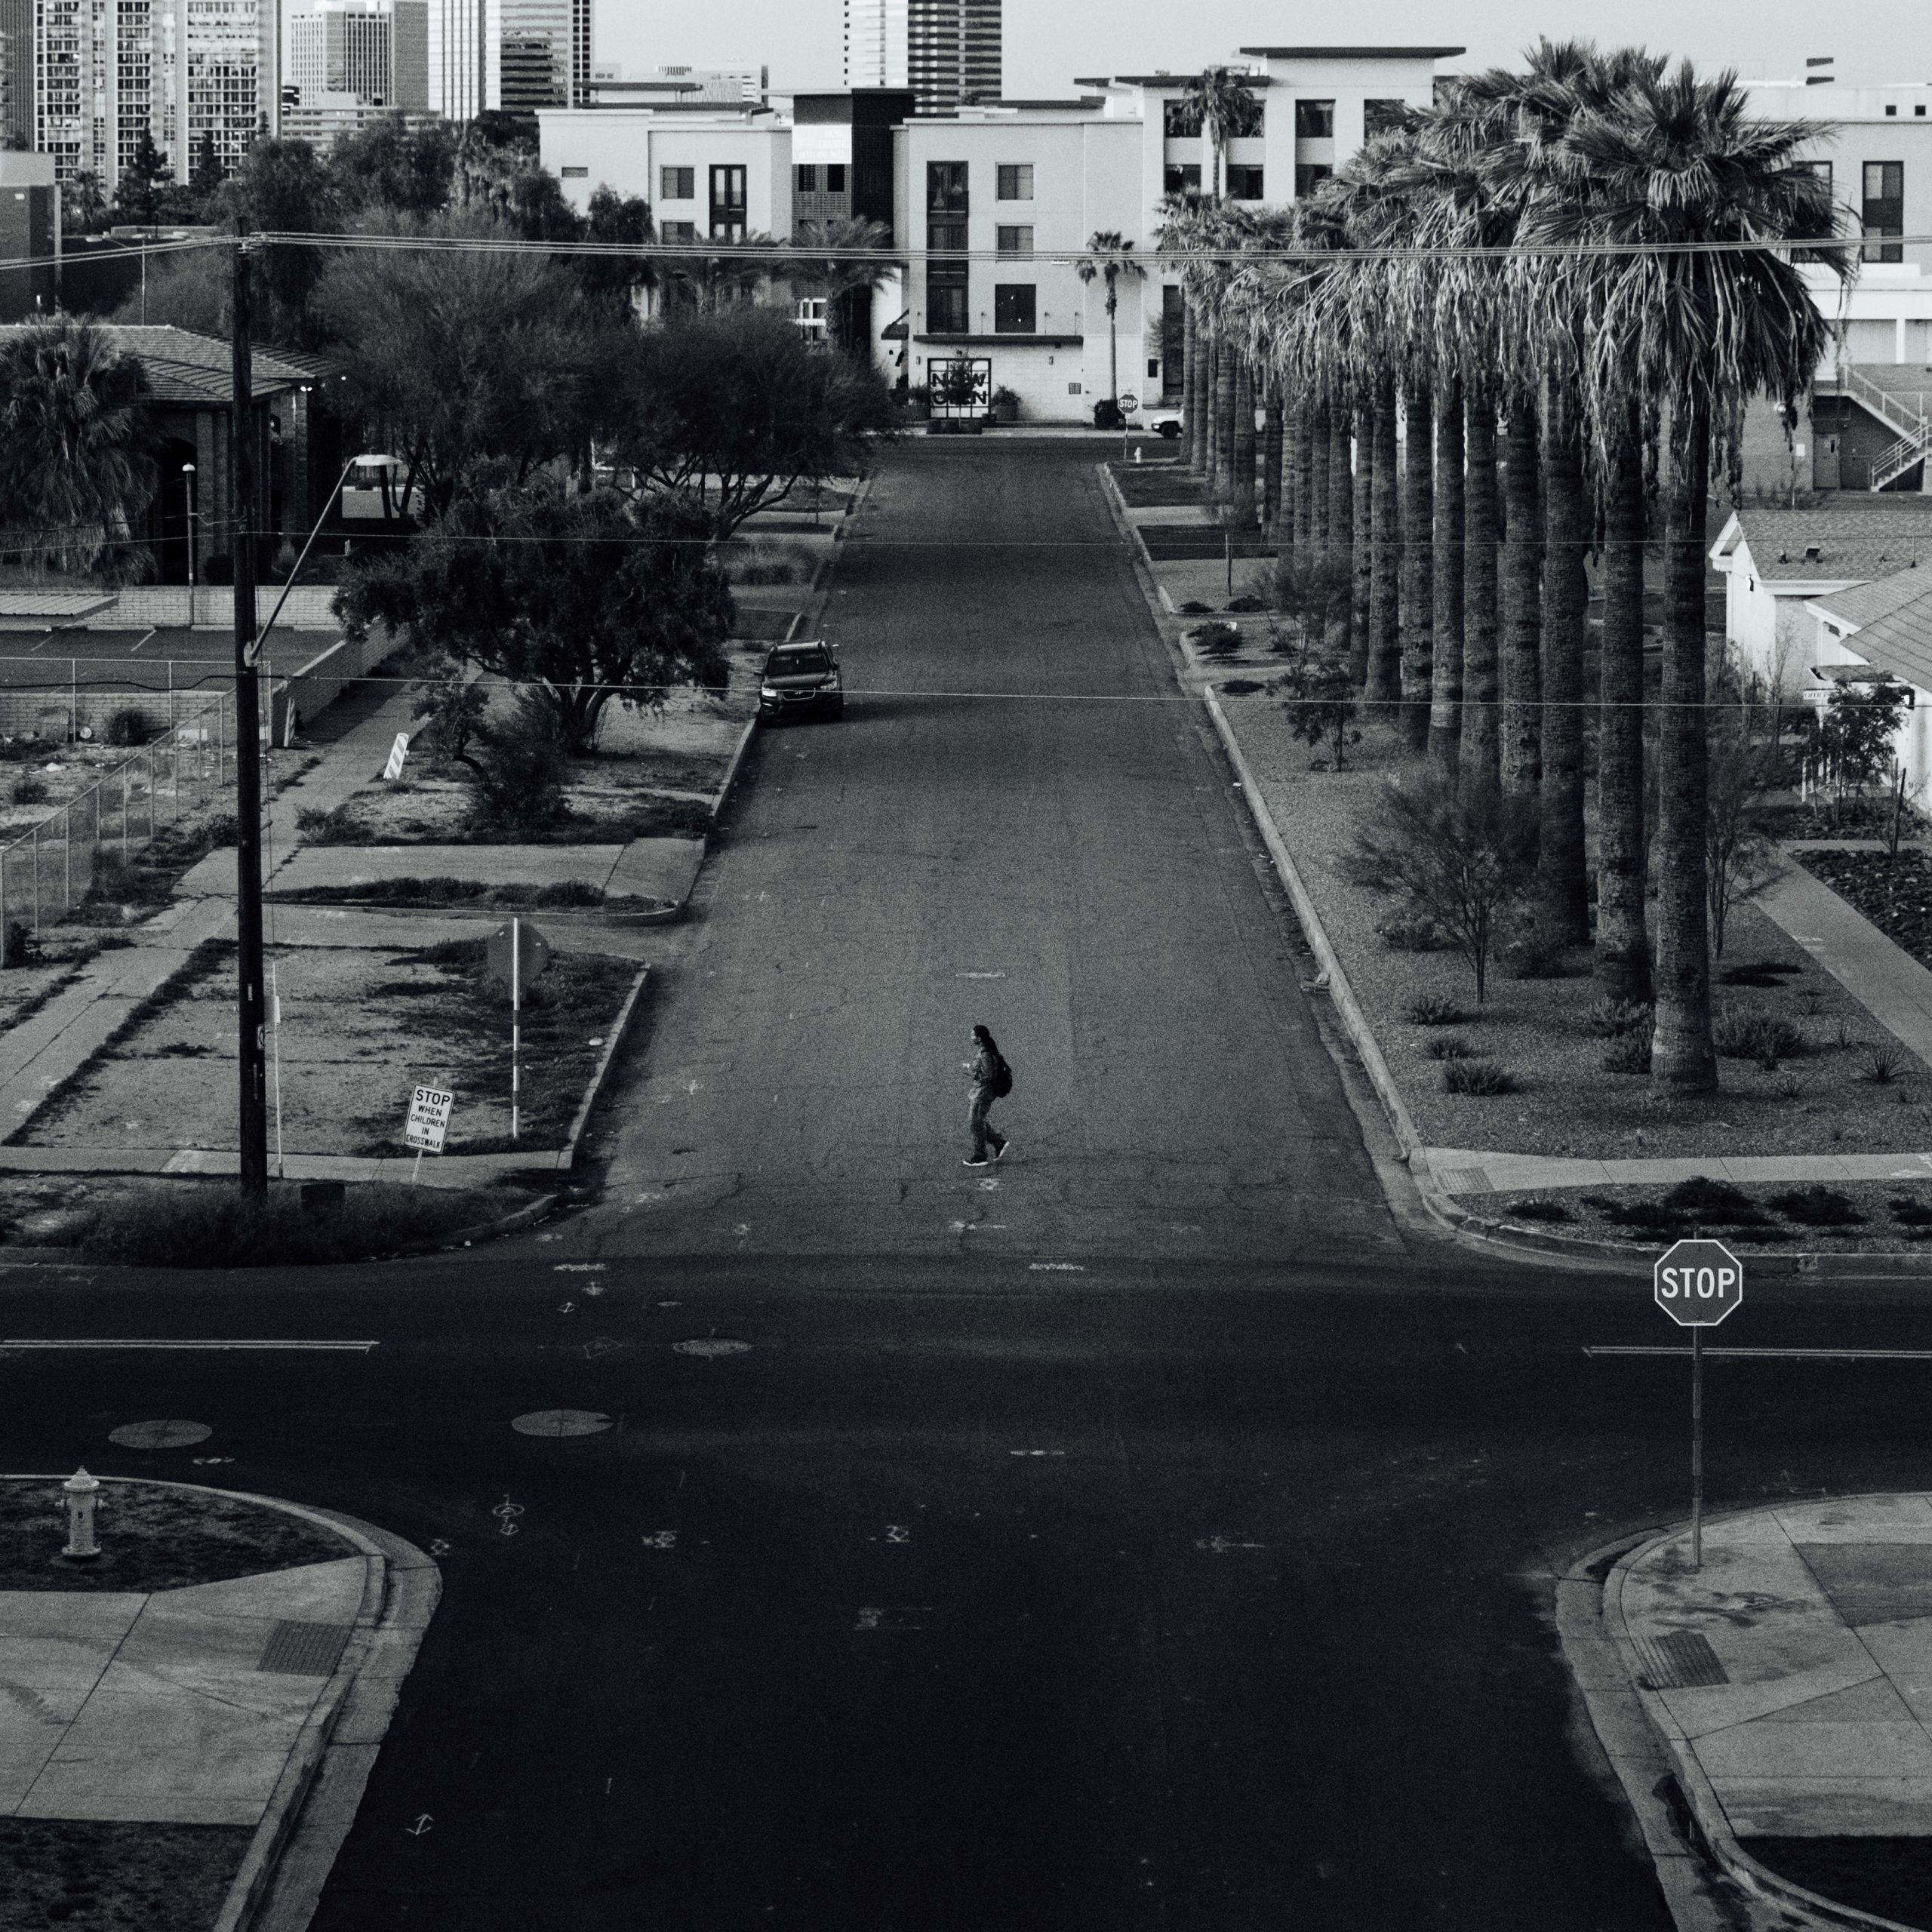 Black and white photo of a person crossing a set of crossroads lined with palm trees on the right.